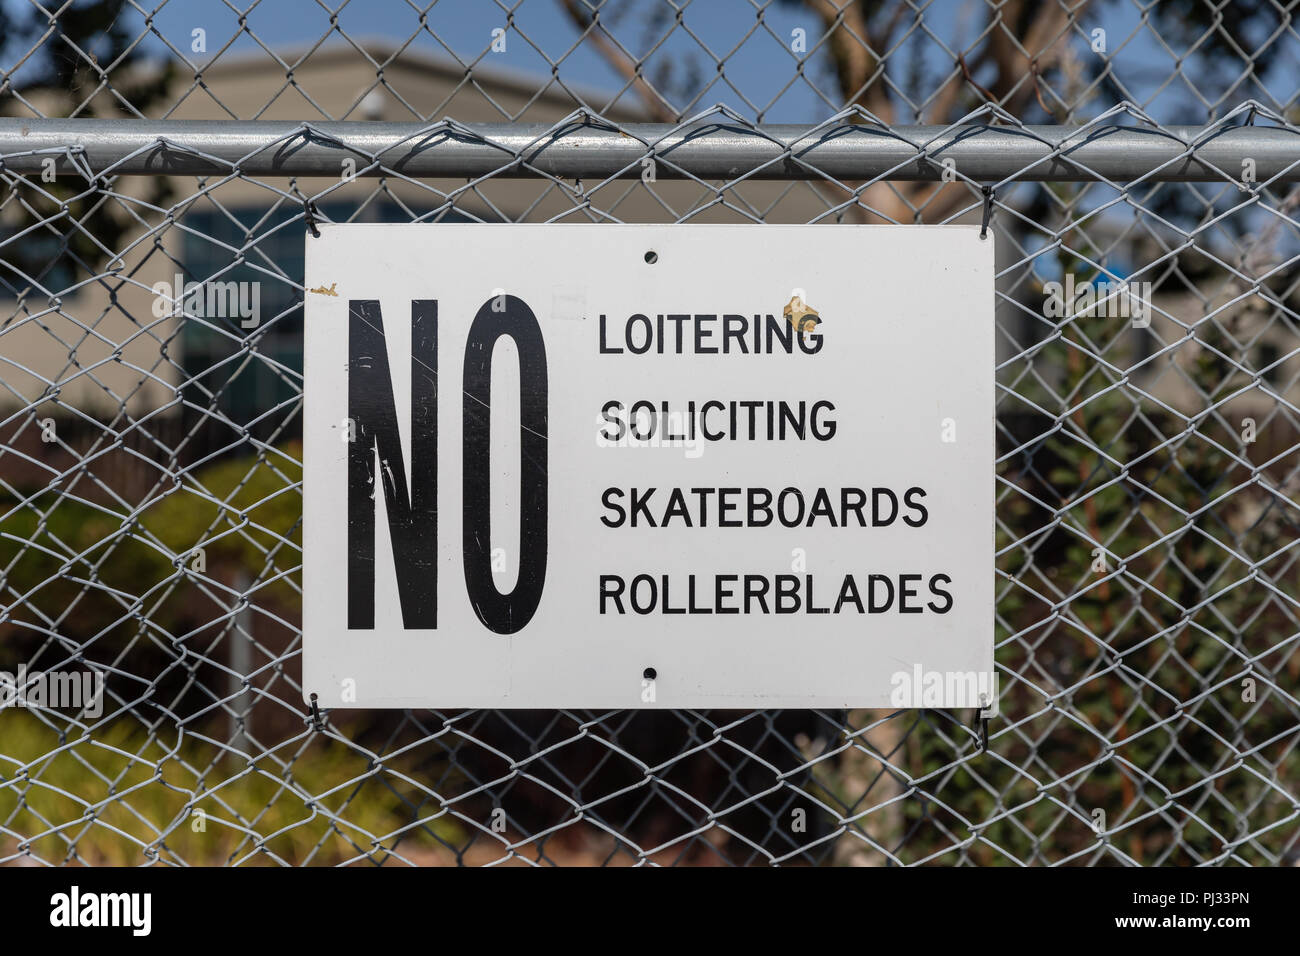 No Loitering, Soliciting, Skateboards, Rollerblades, sign on fence; California, USA Stock Photo